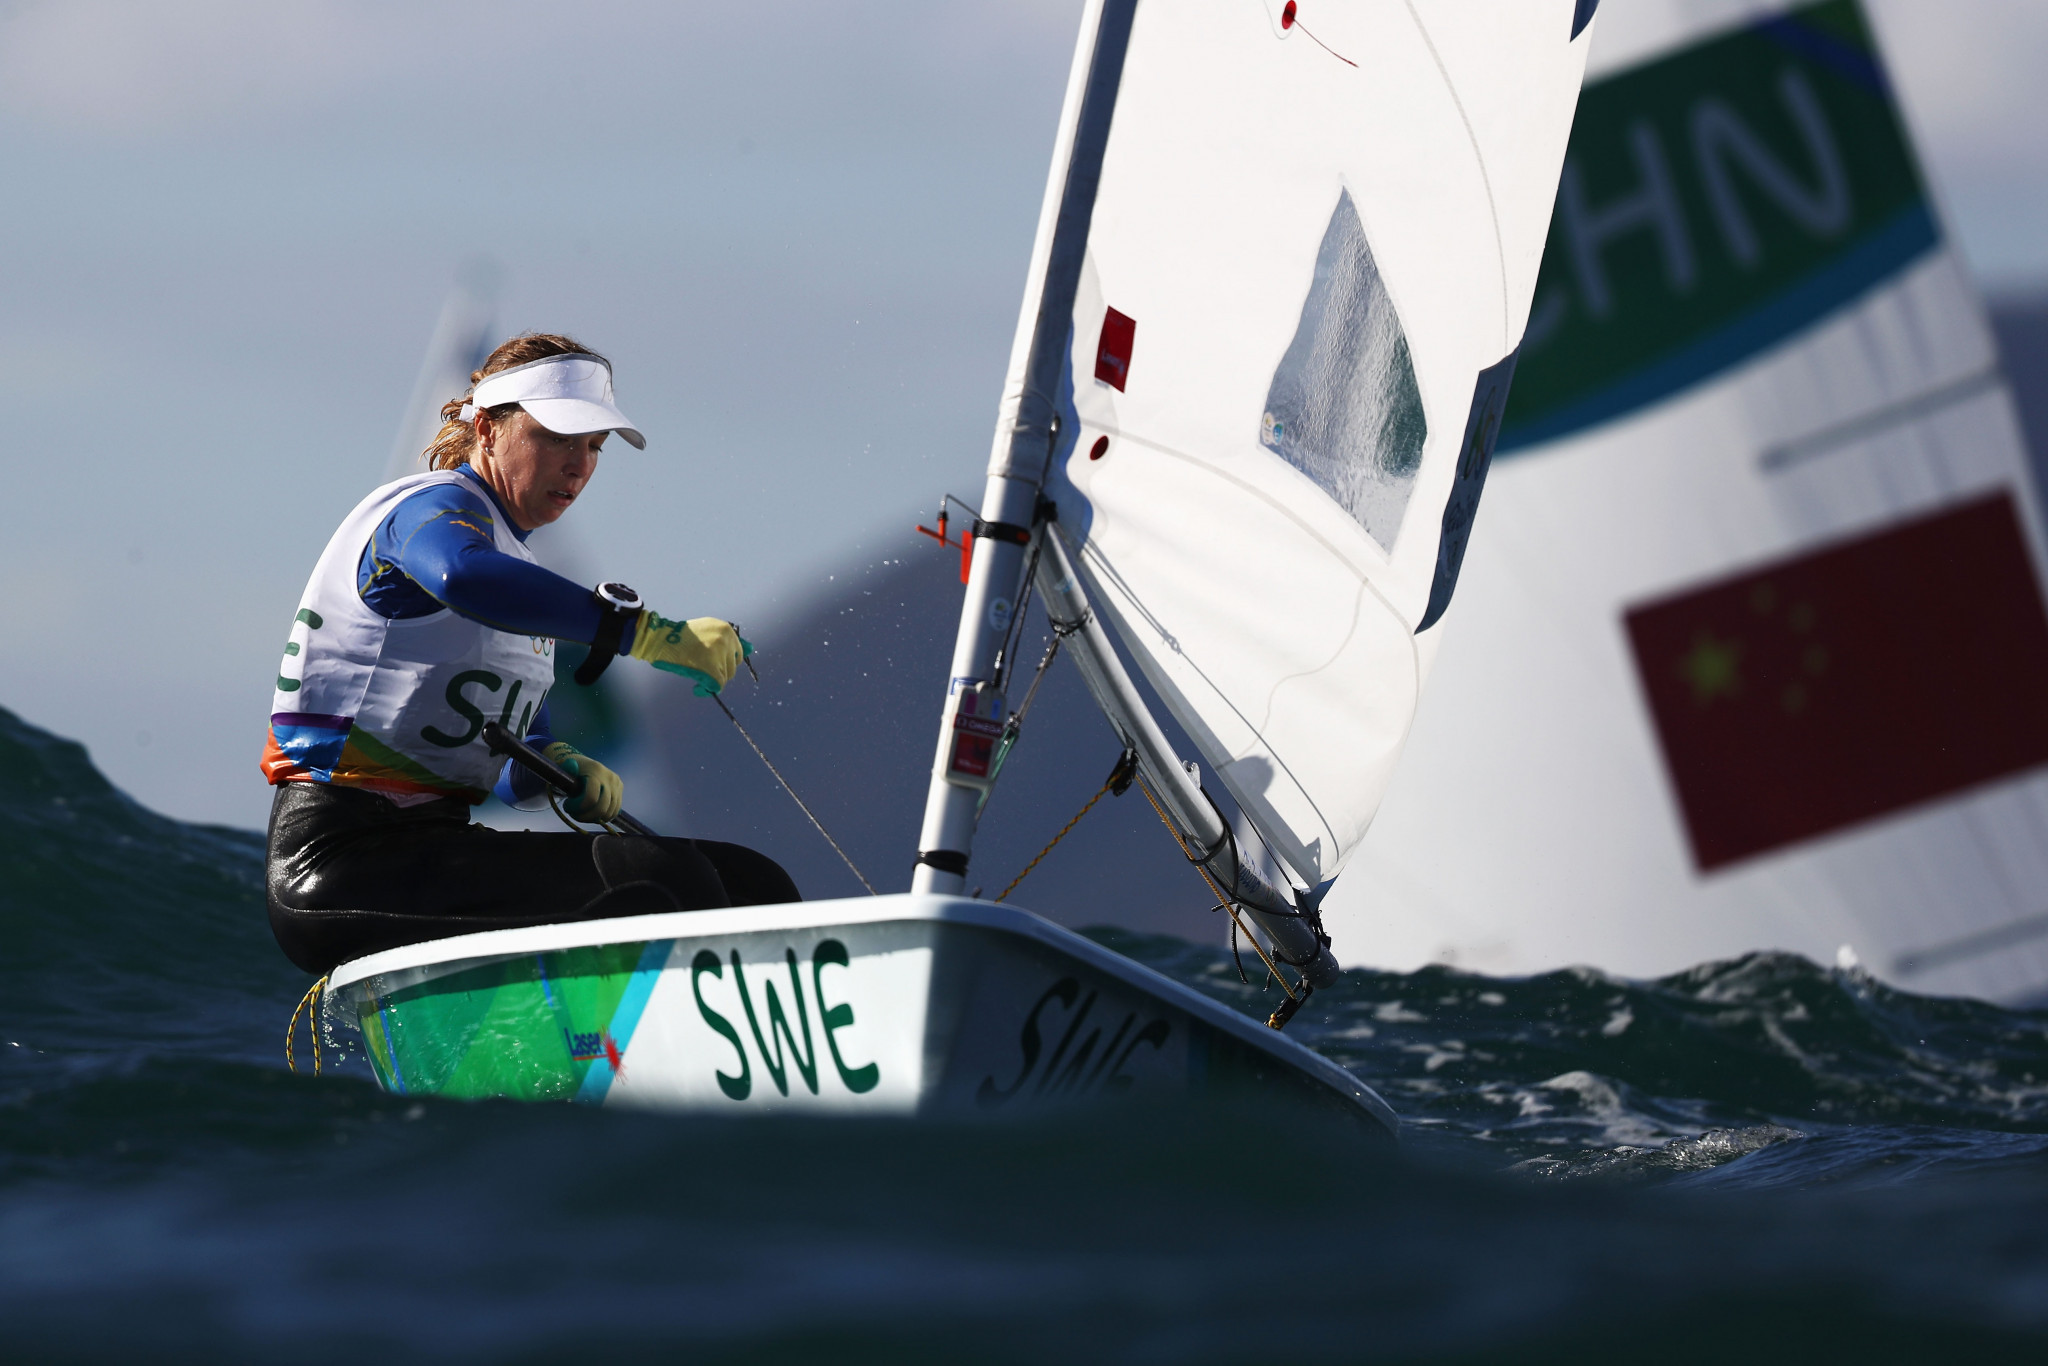 Josefin Olsson of Sweden leads at the ILCA Laser Radial Women's World Championship ©Getty Images